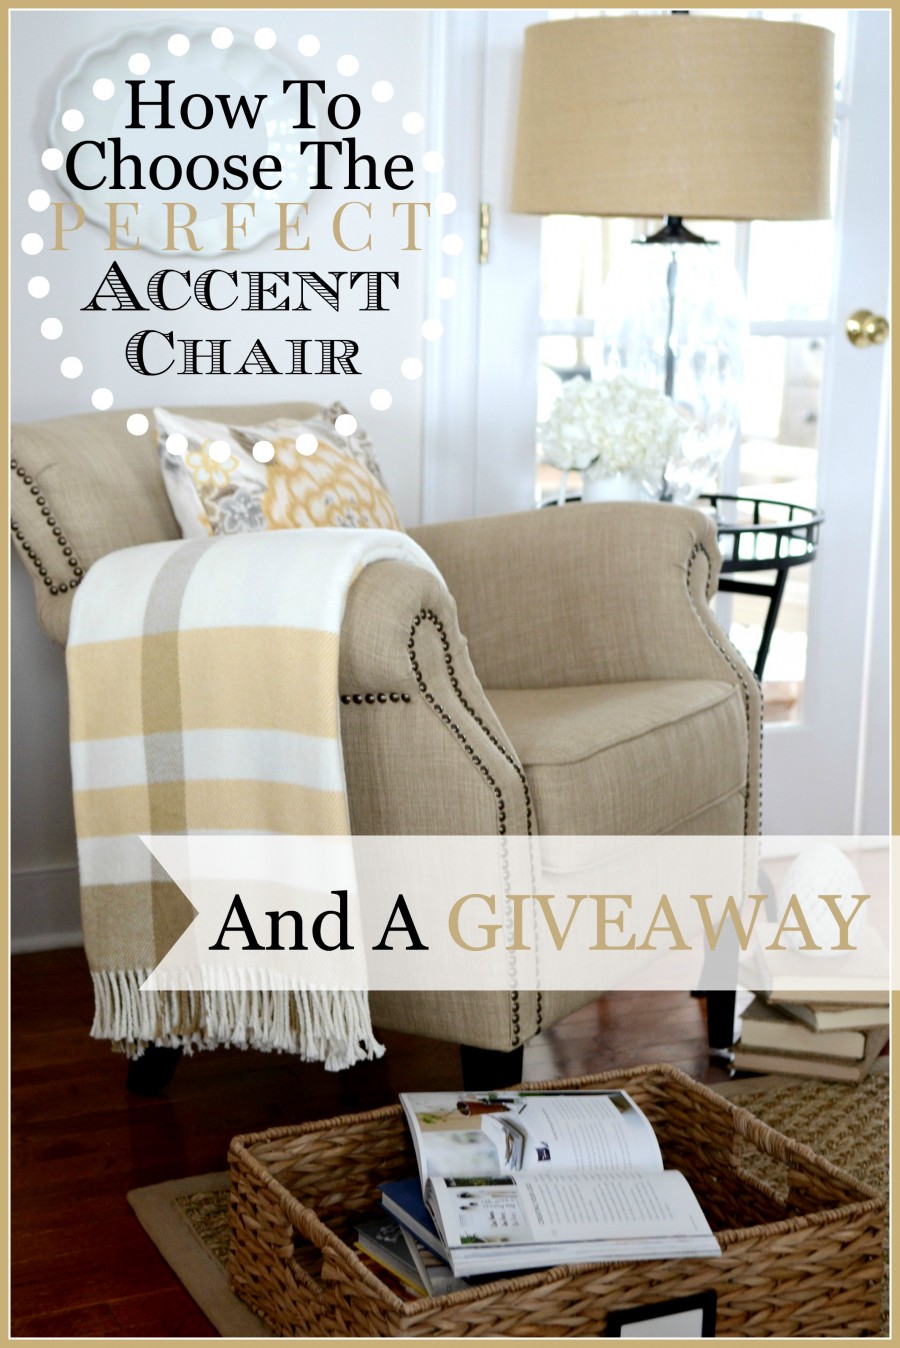 HOW TO CHOOSE AN ACCENT CHAIR